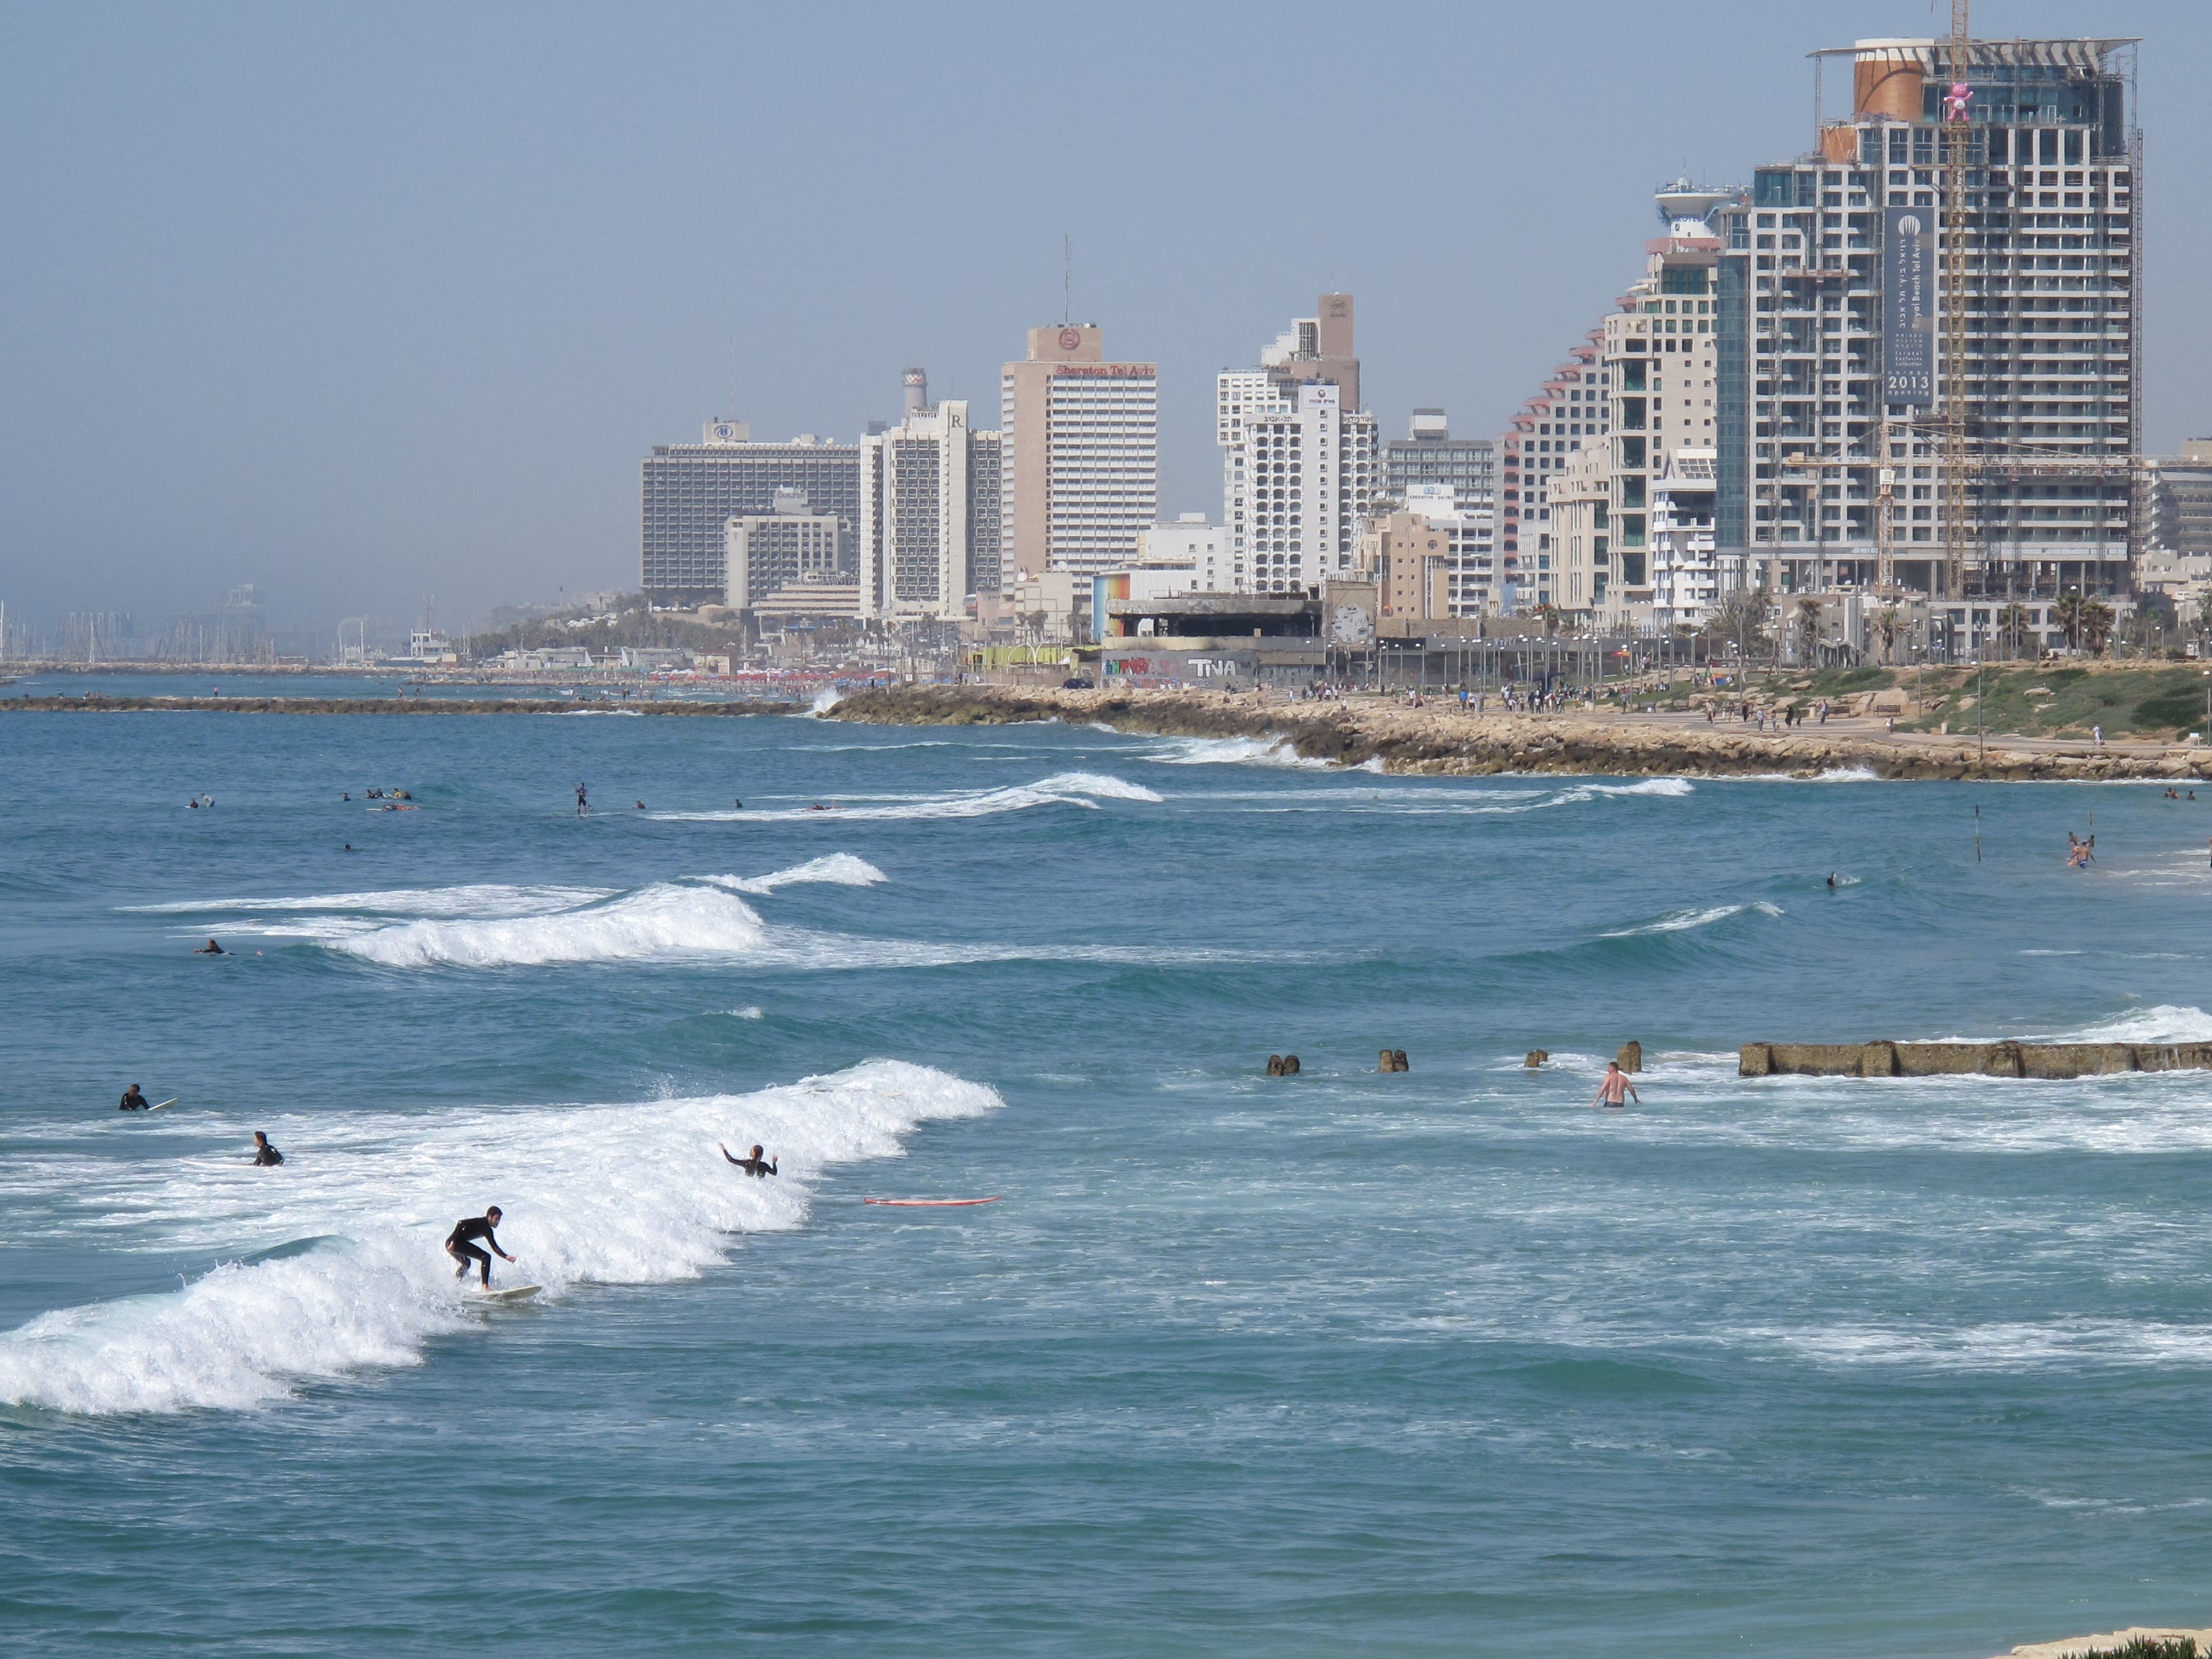 Spring break? Israel, which has the most advance vaccination programme, could re-open to tourism by March